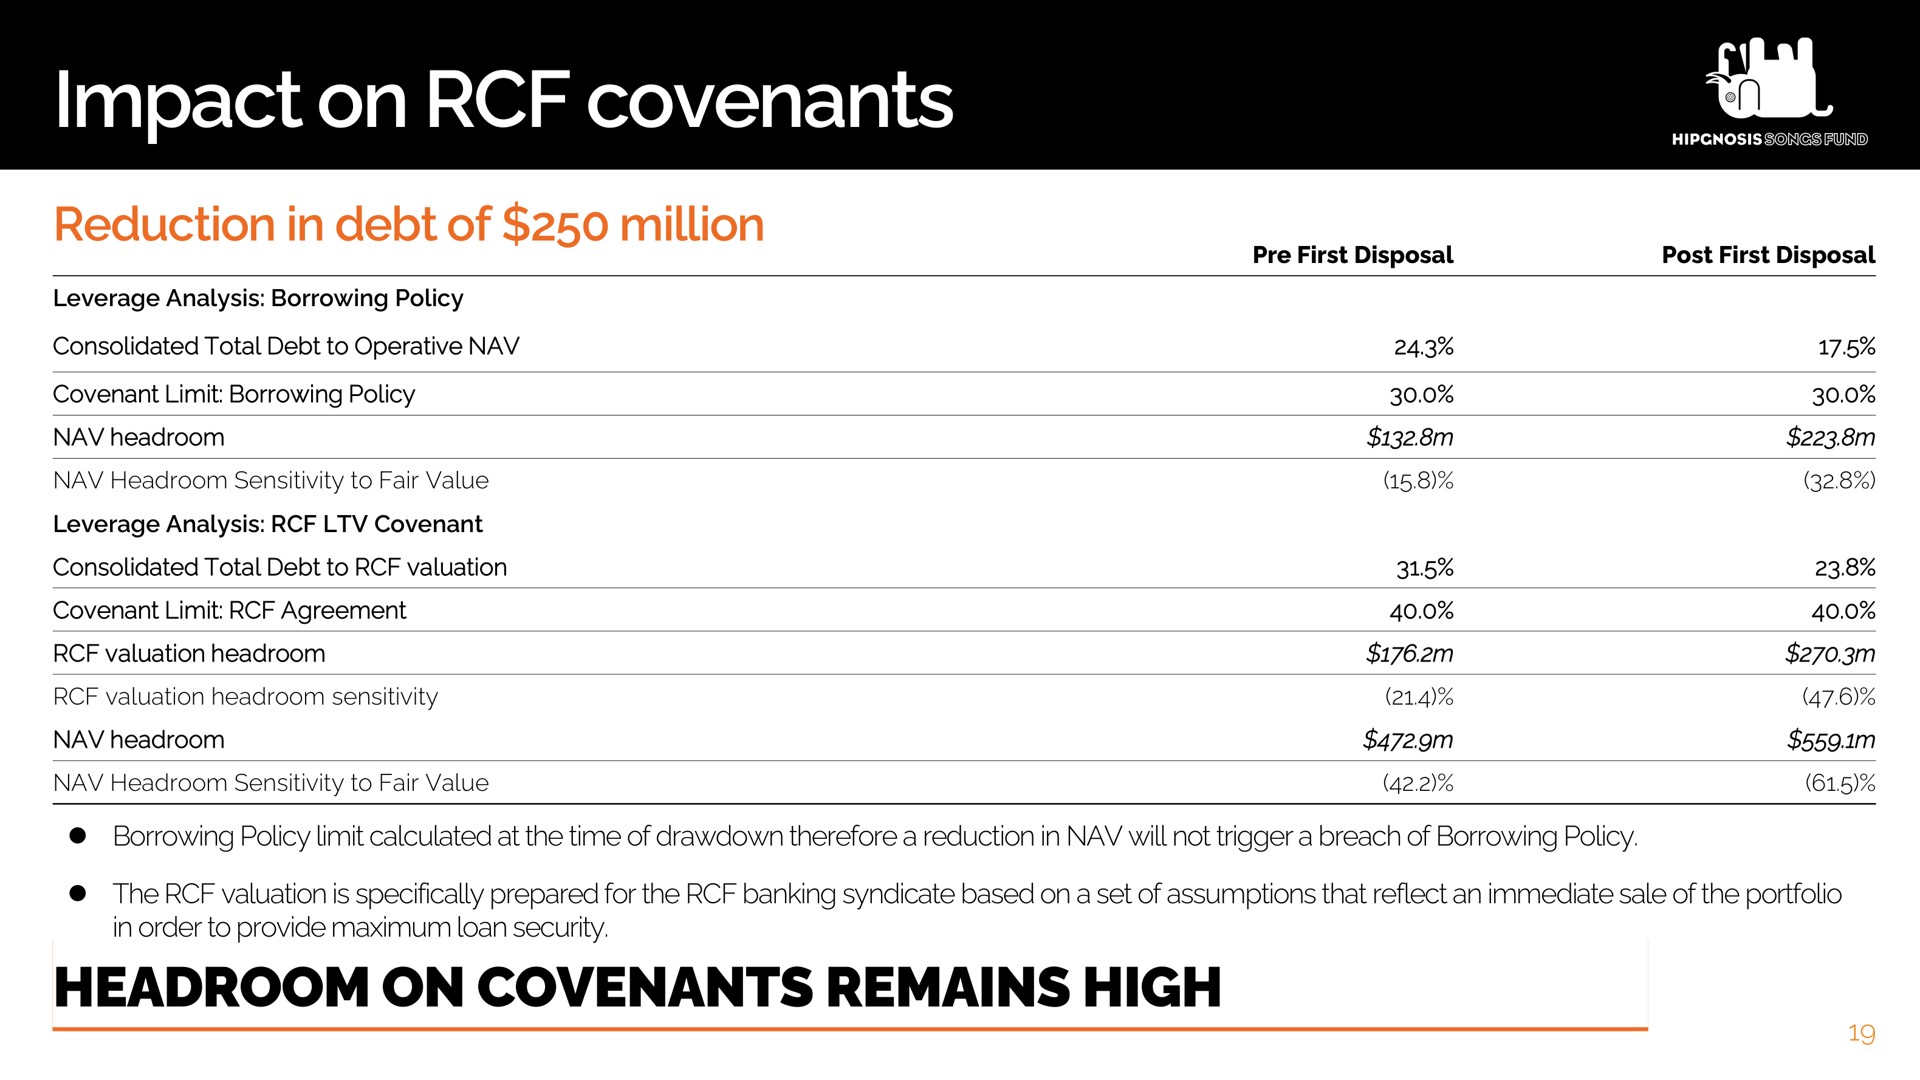 impact on covenants a headroom remains high | Hipgnosis Songs Fund